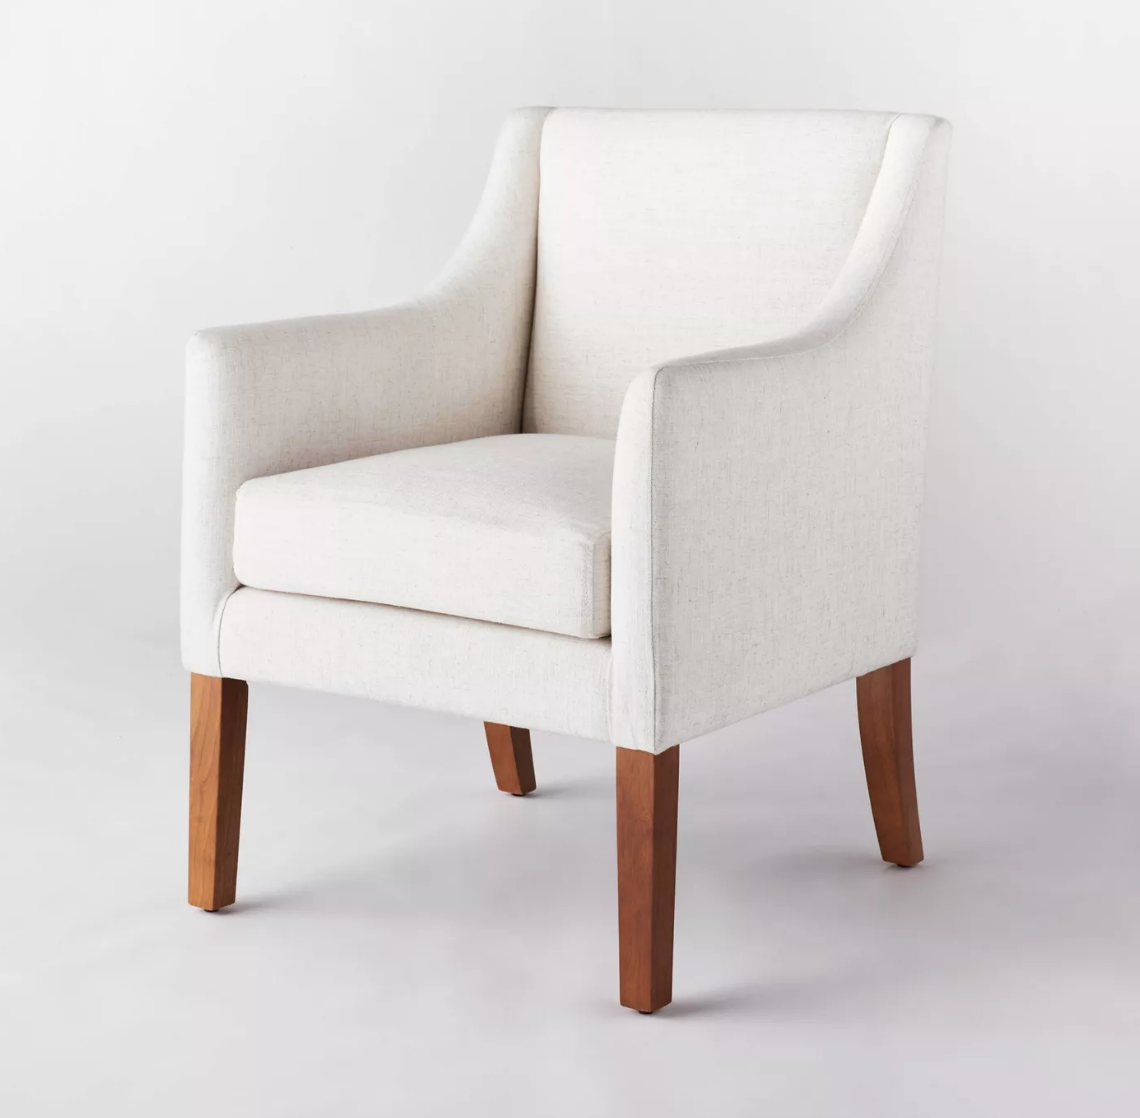 Target - Clearfield Swoop Arm Dining Chair - $150